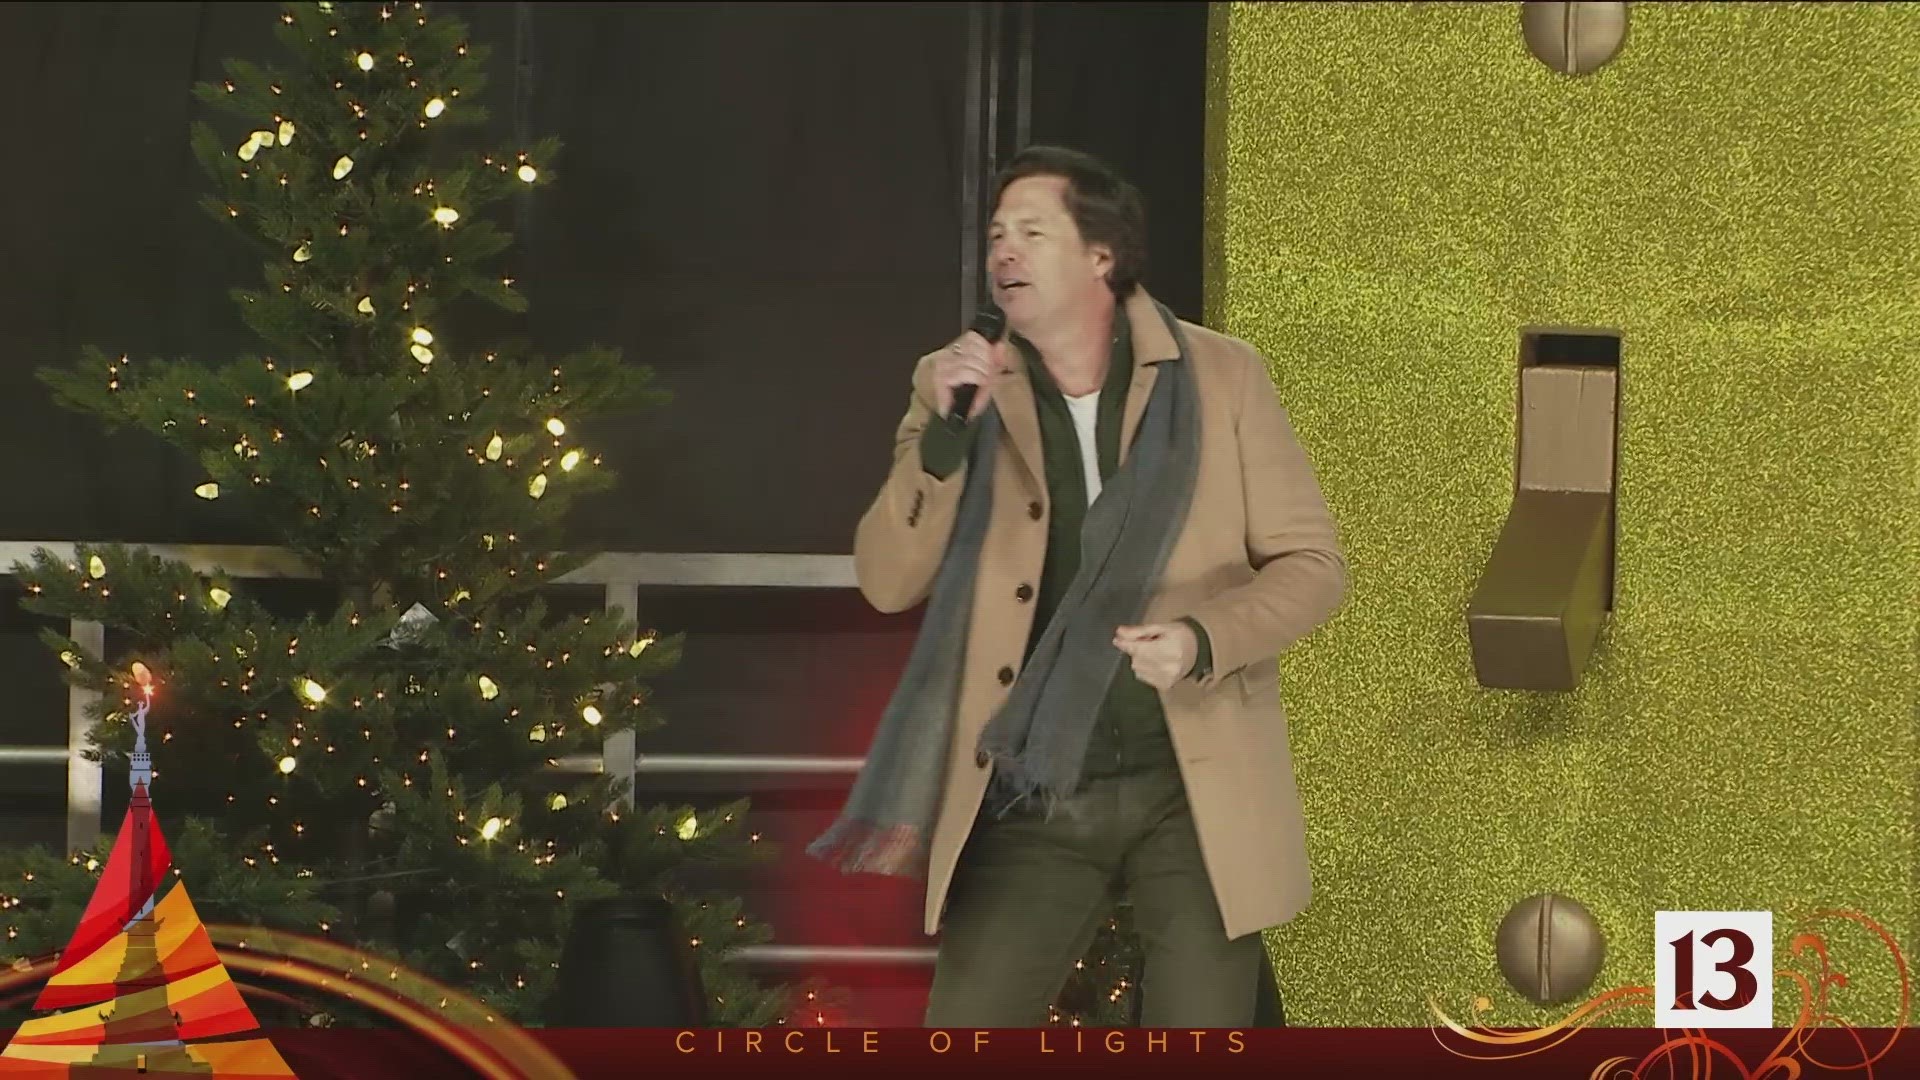 Watch Clayton Anderson's full performance at this year's Circle of Lights here.